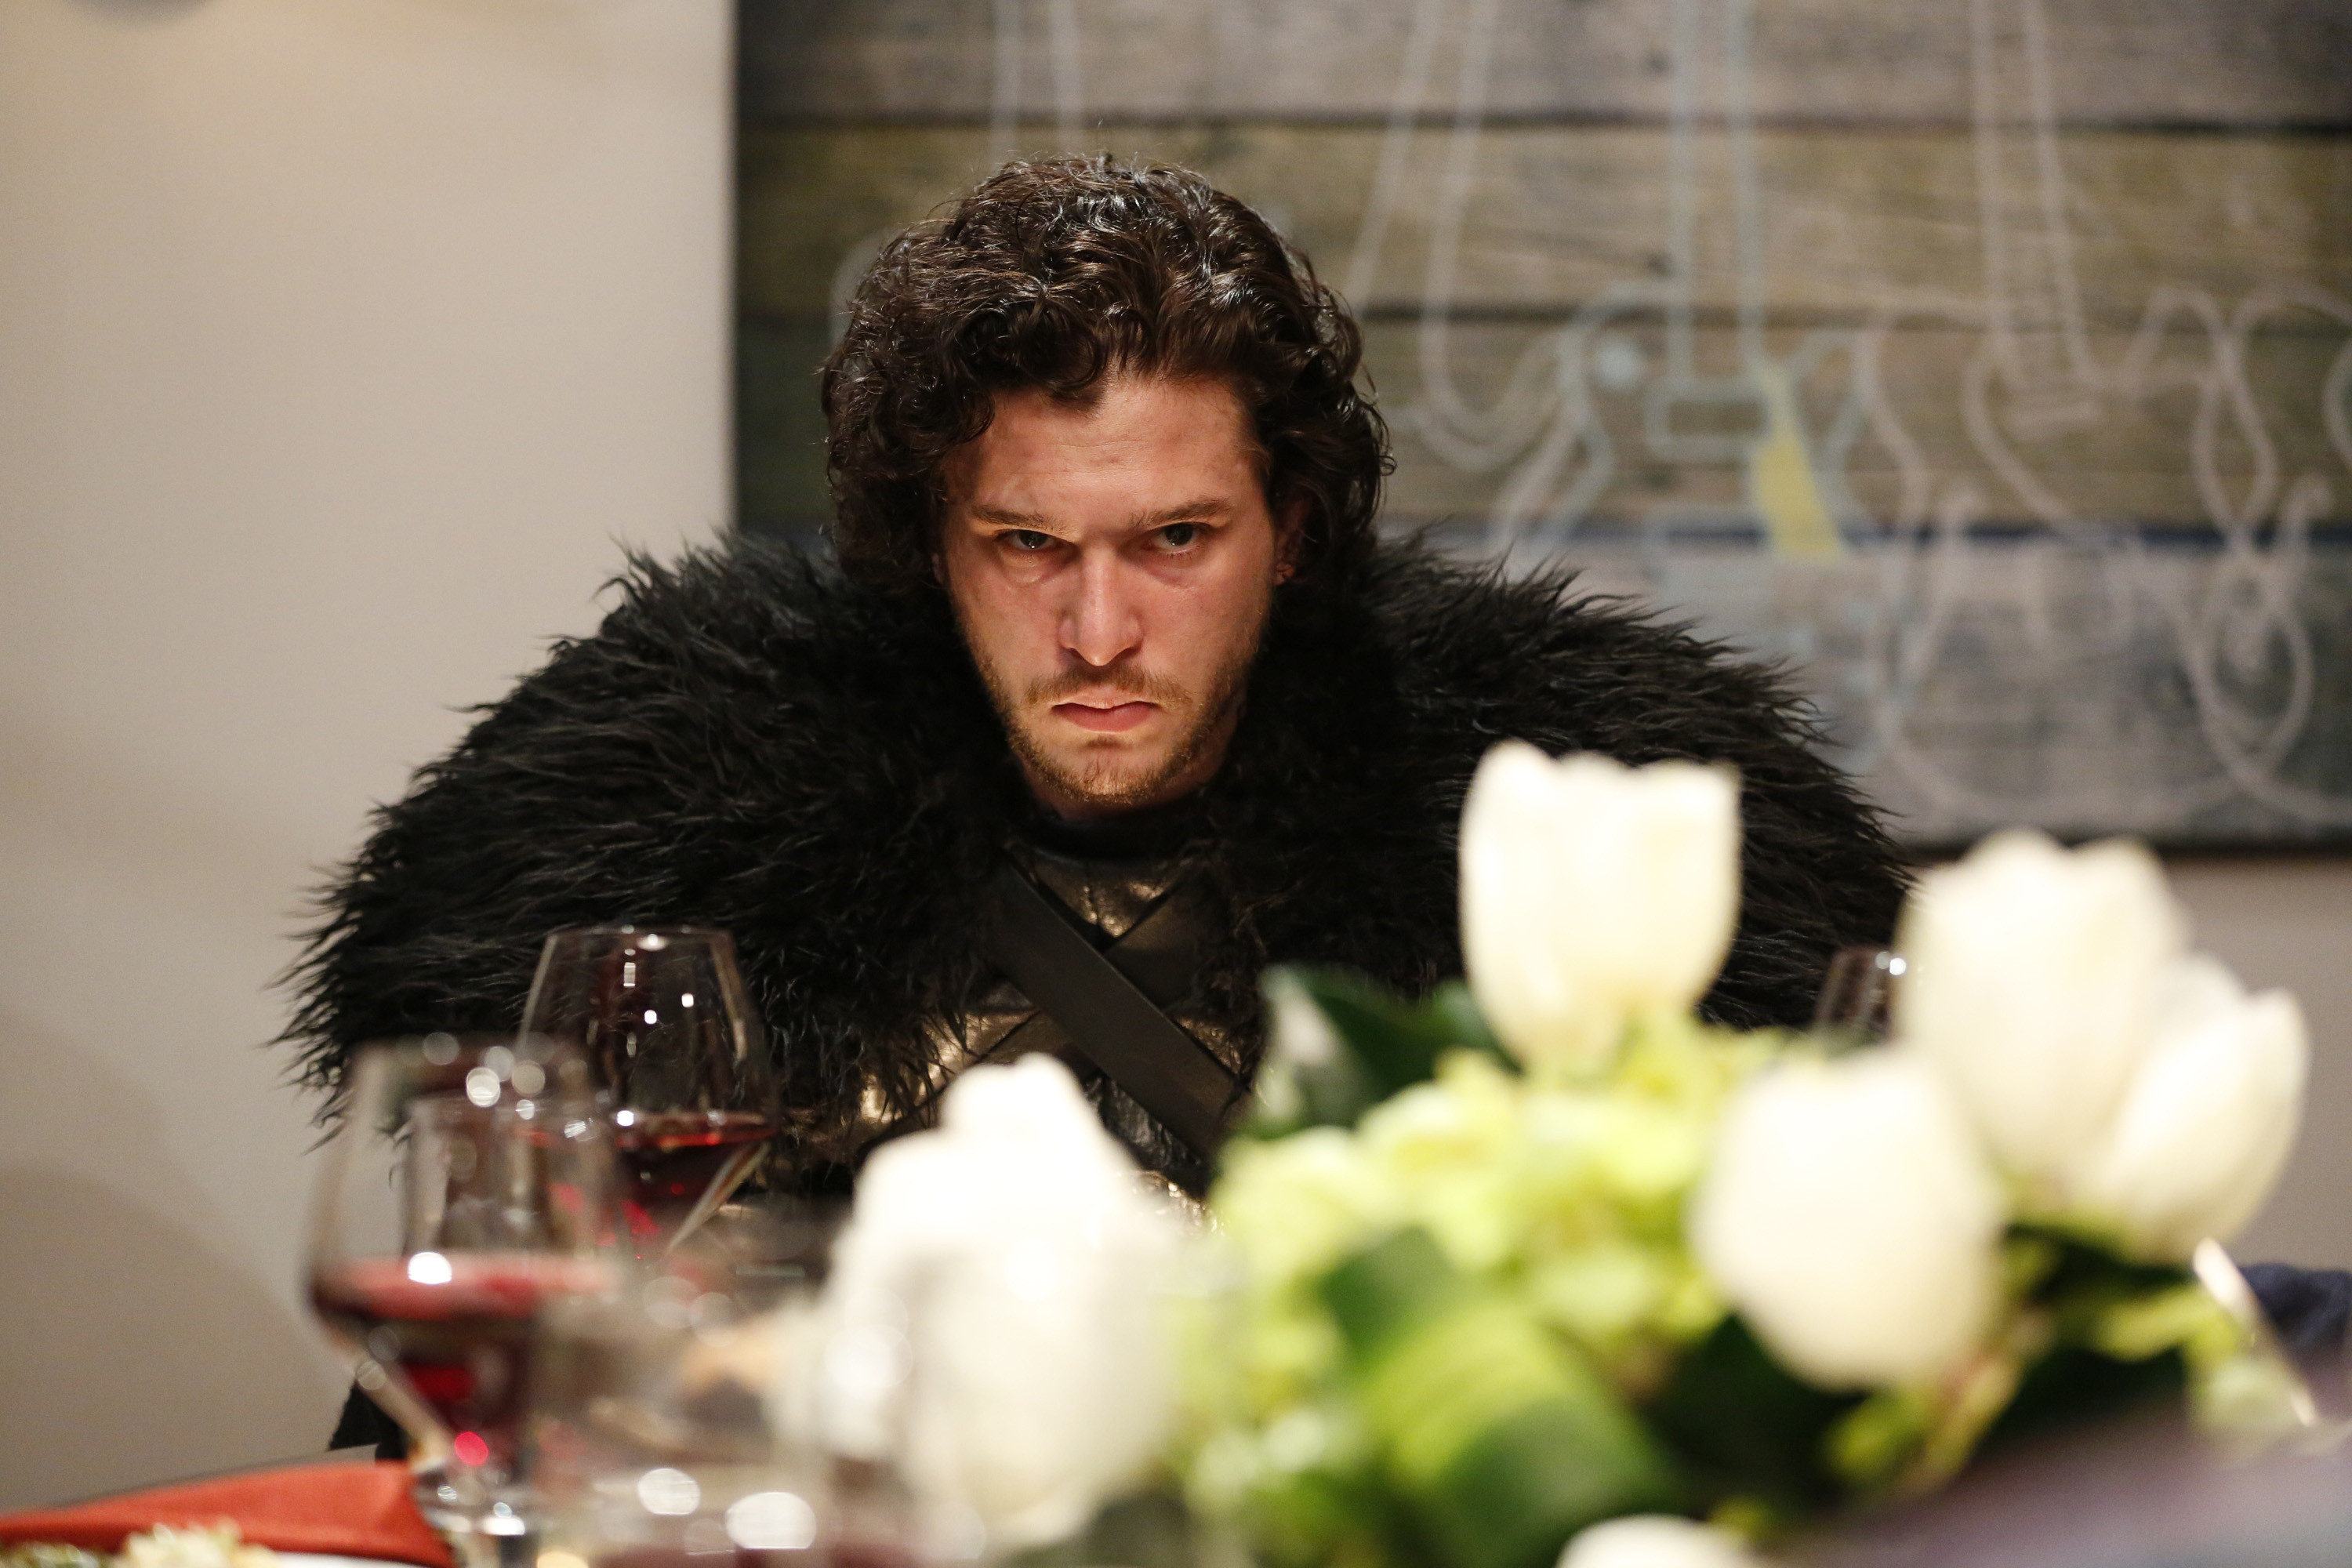 This Website Tells You Who'll Die Next In ‘Game Of Thrones'